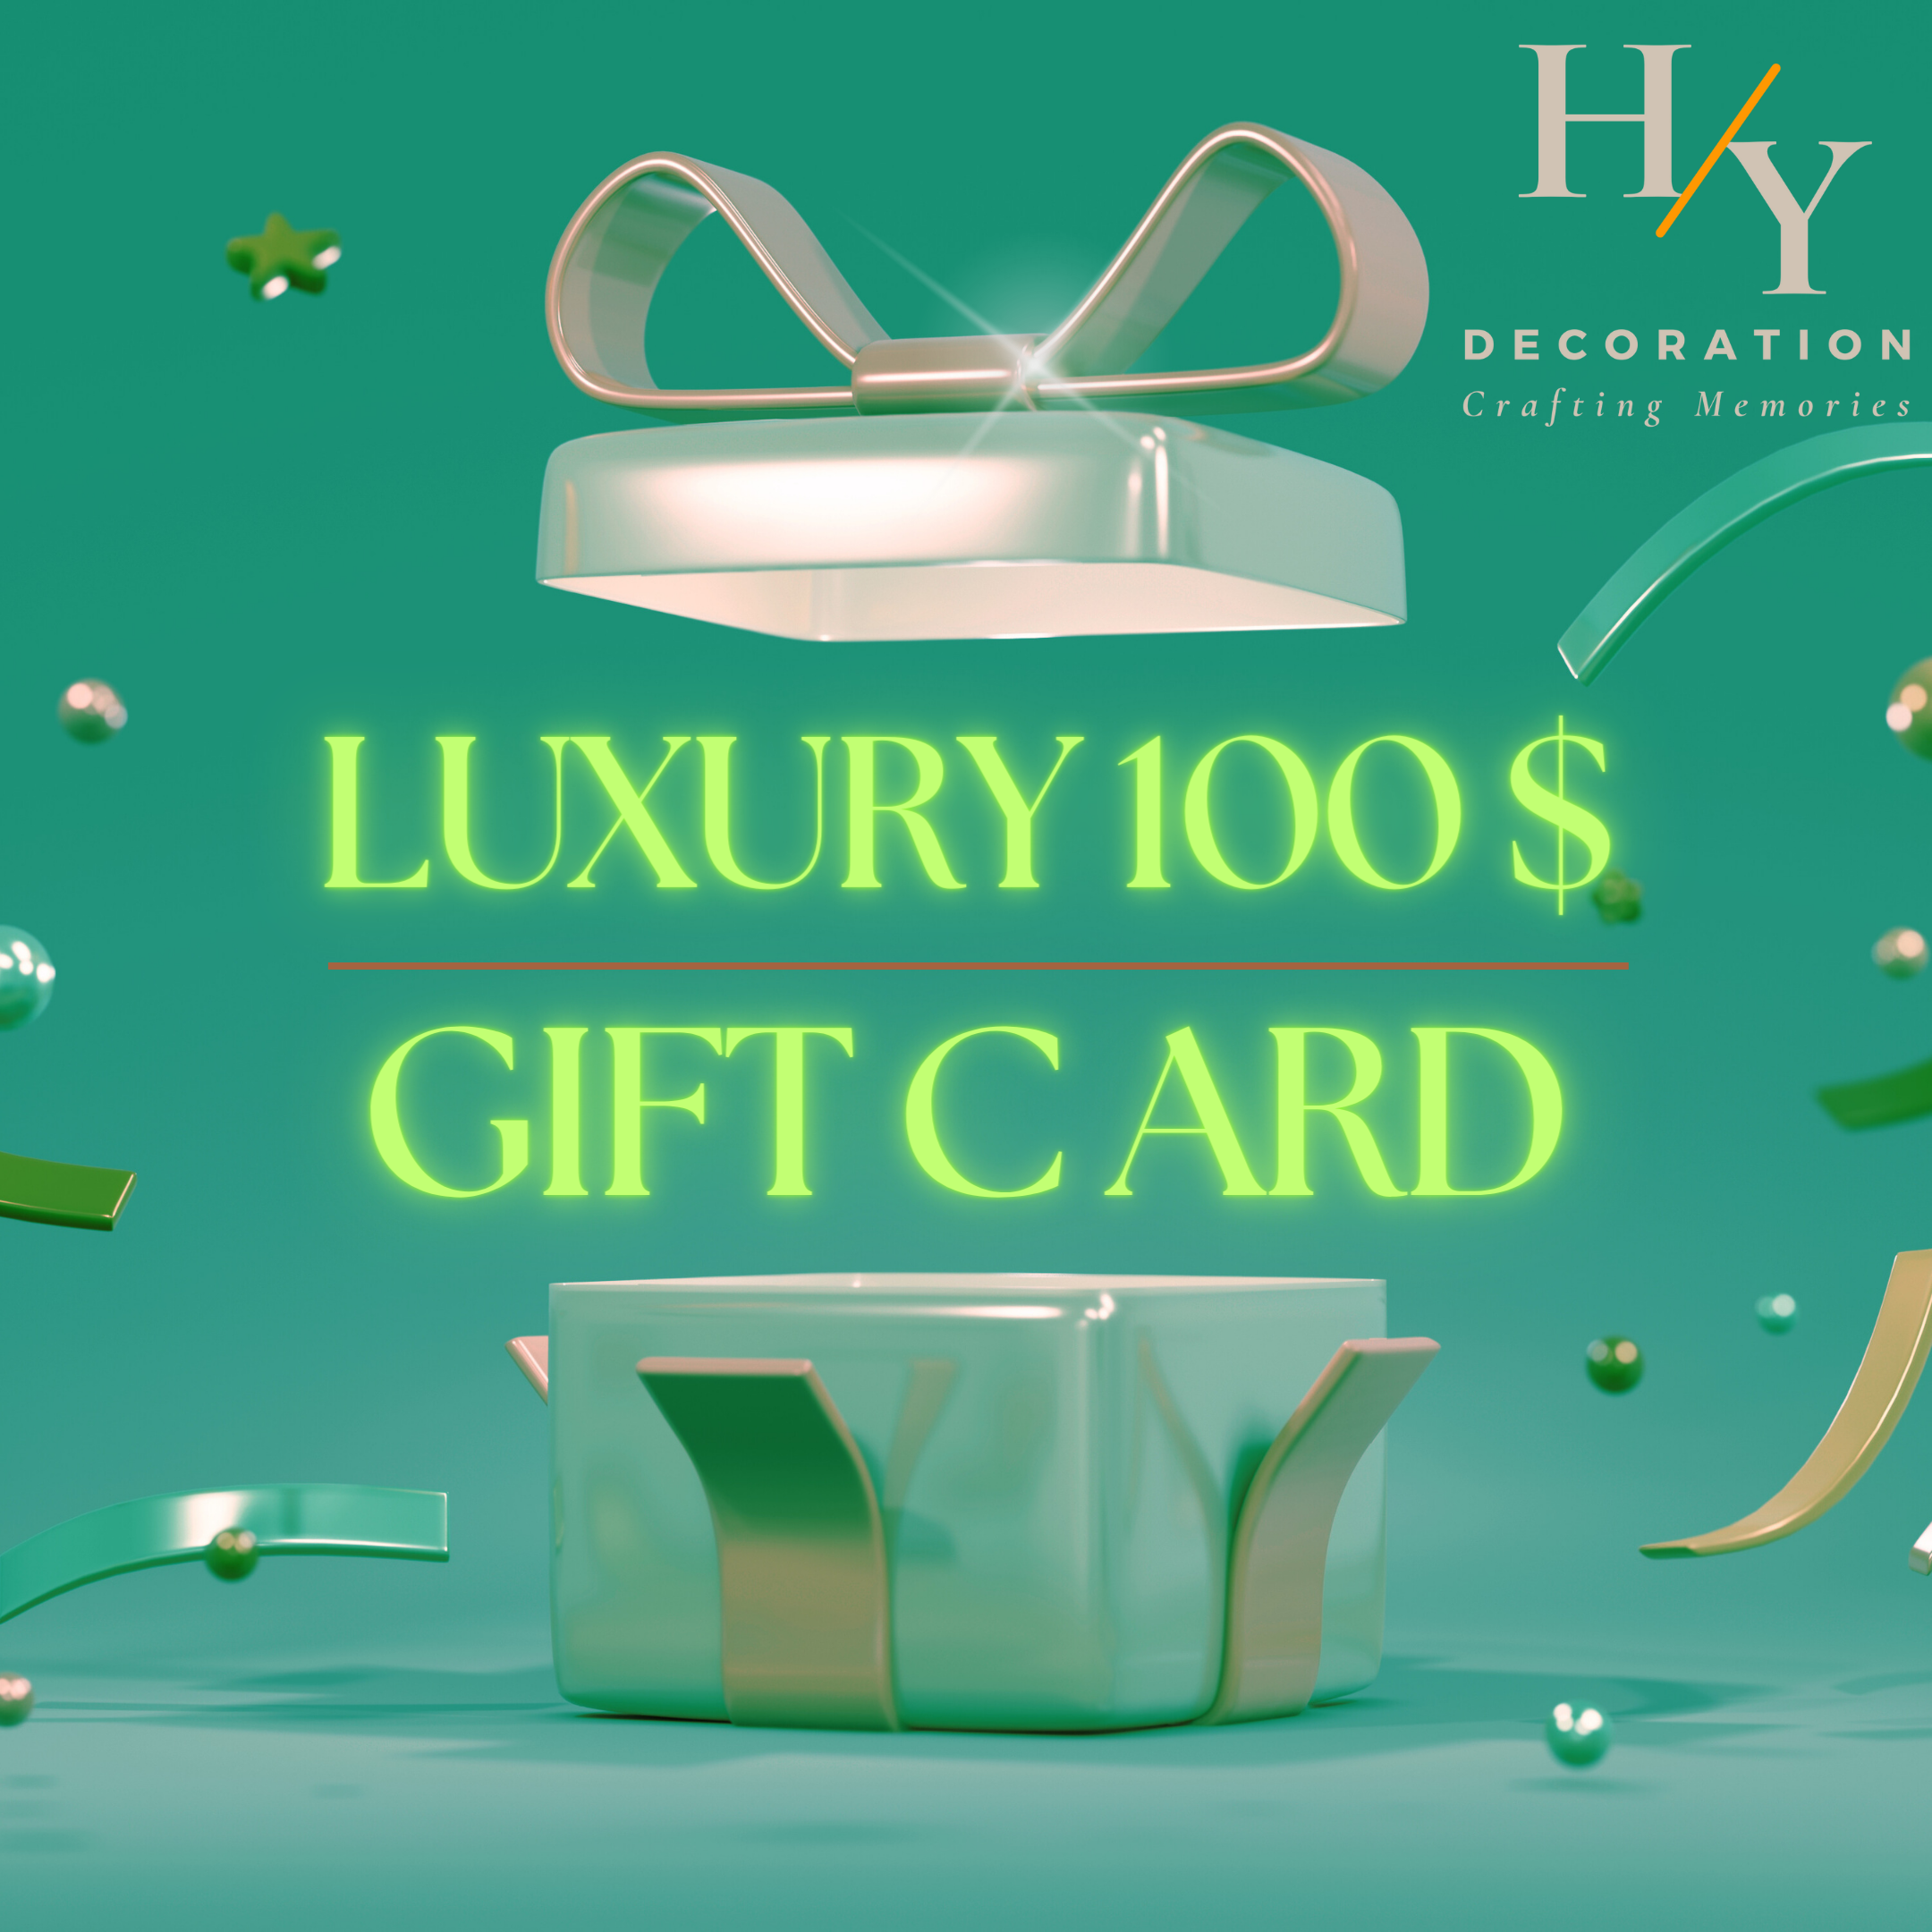 HY Decoration Luxury Gift Card 100 $